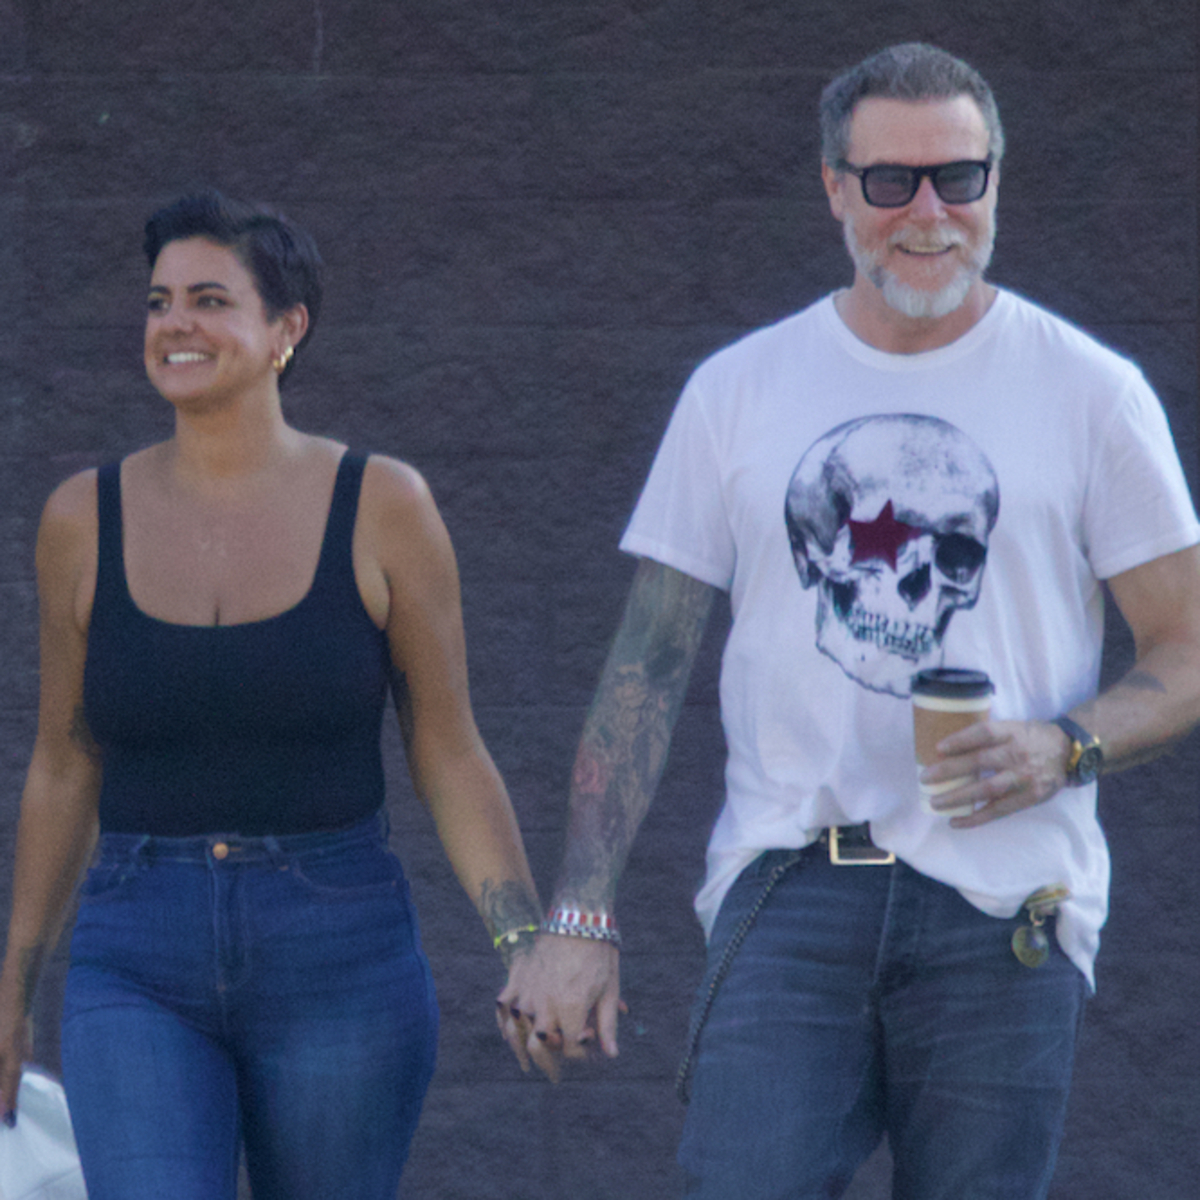 Tori Spelling’s Ex Dean McDermott Packs on the PDA With Lily Calo